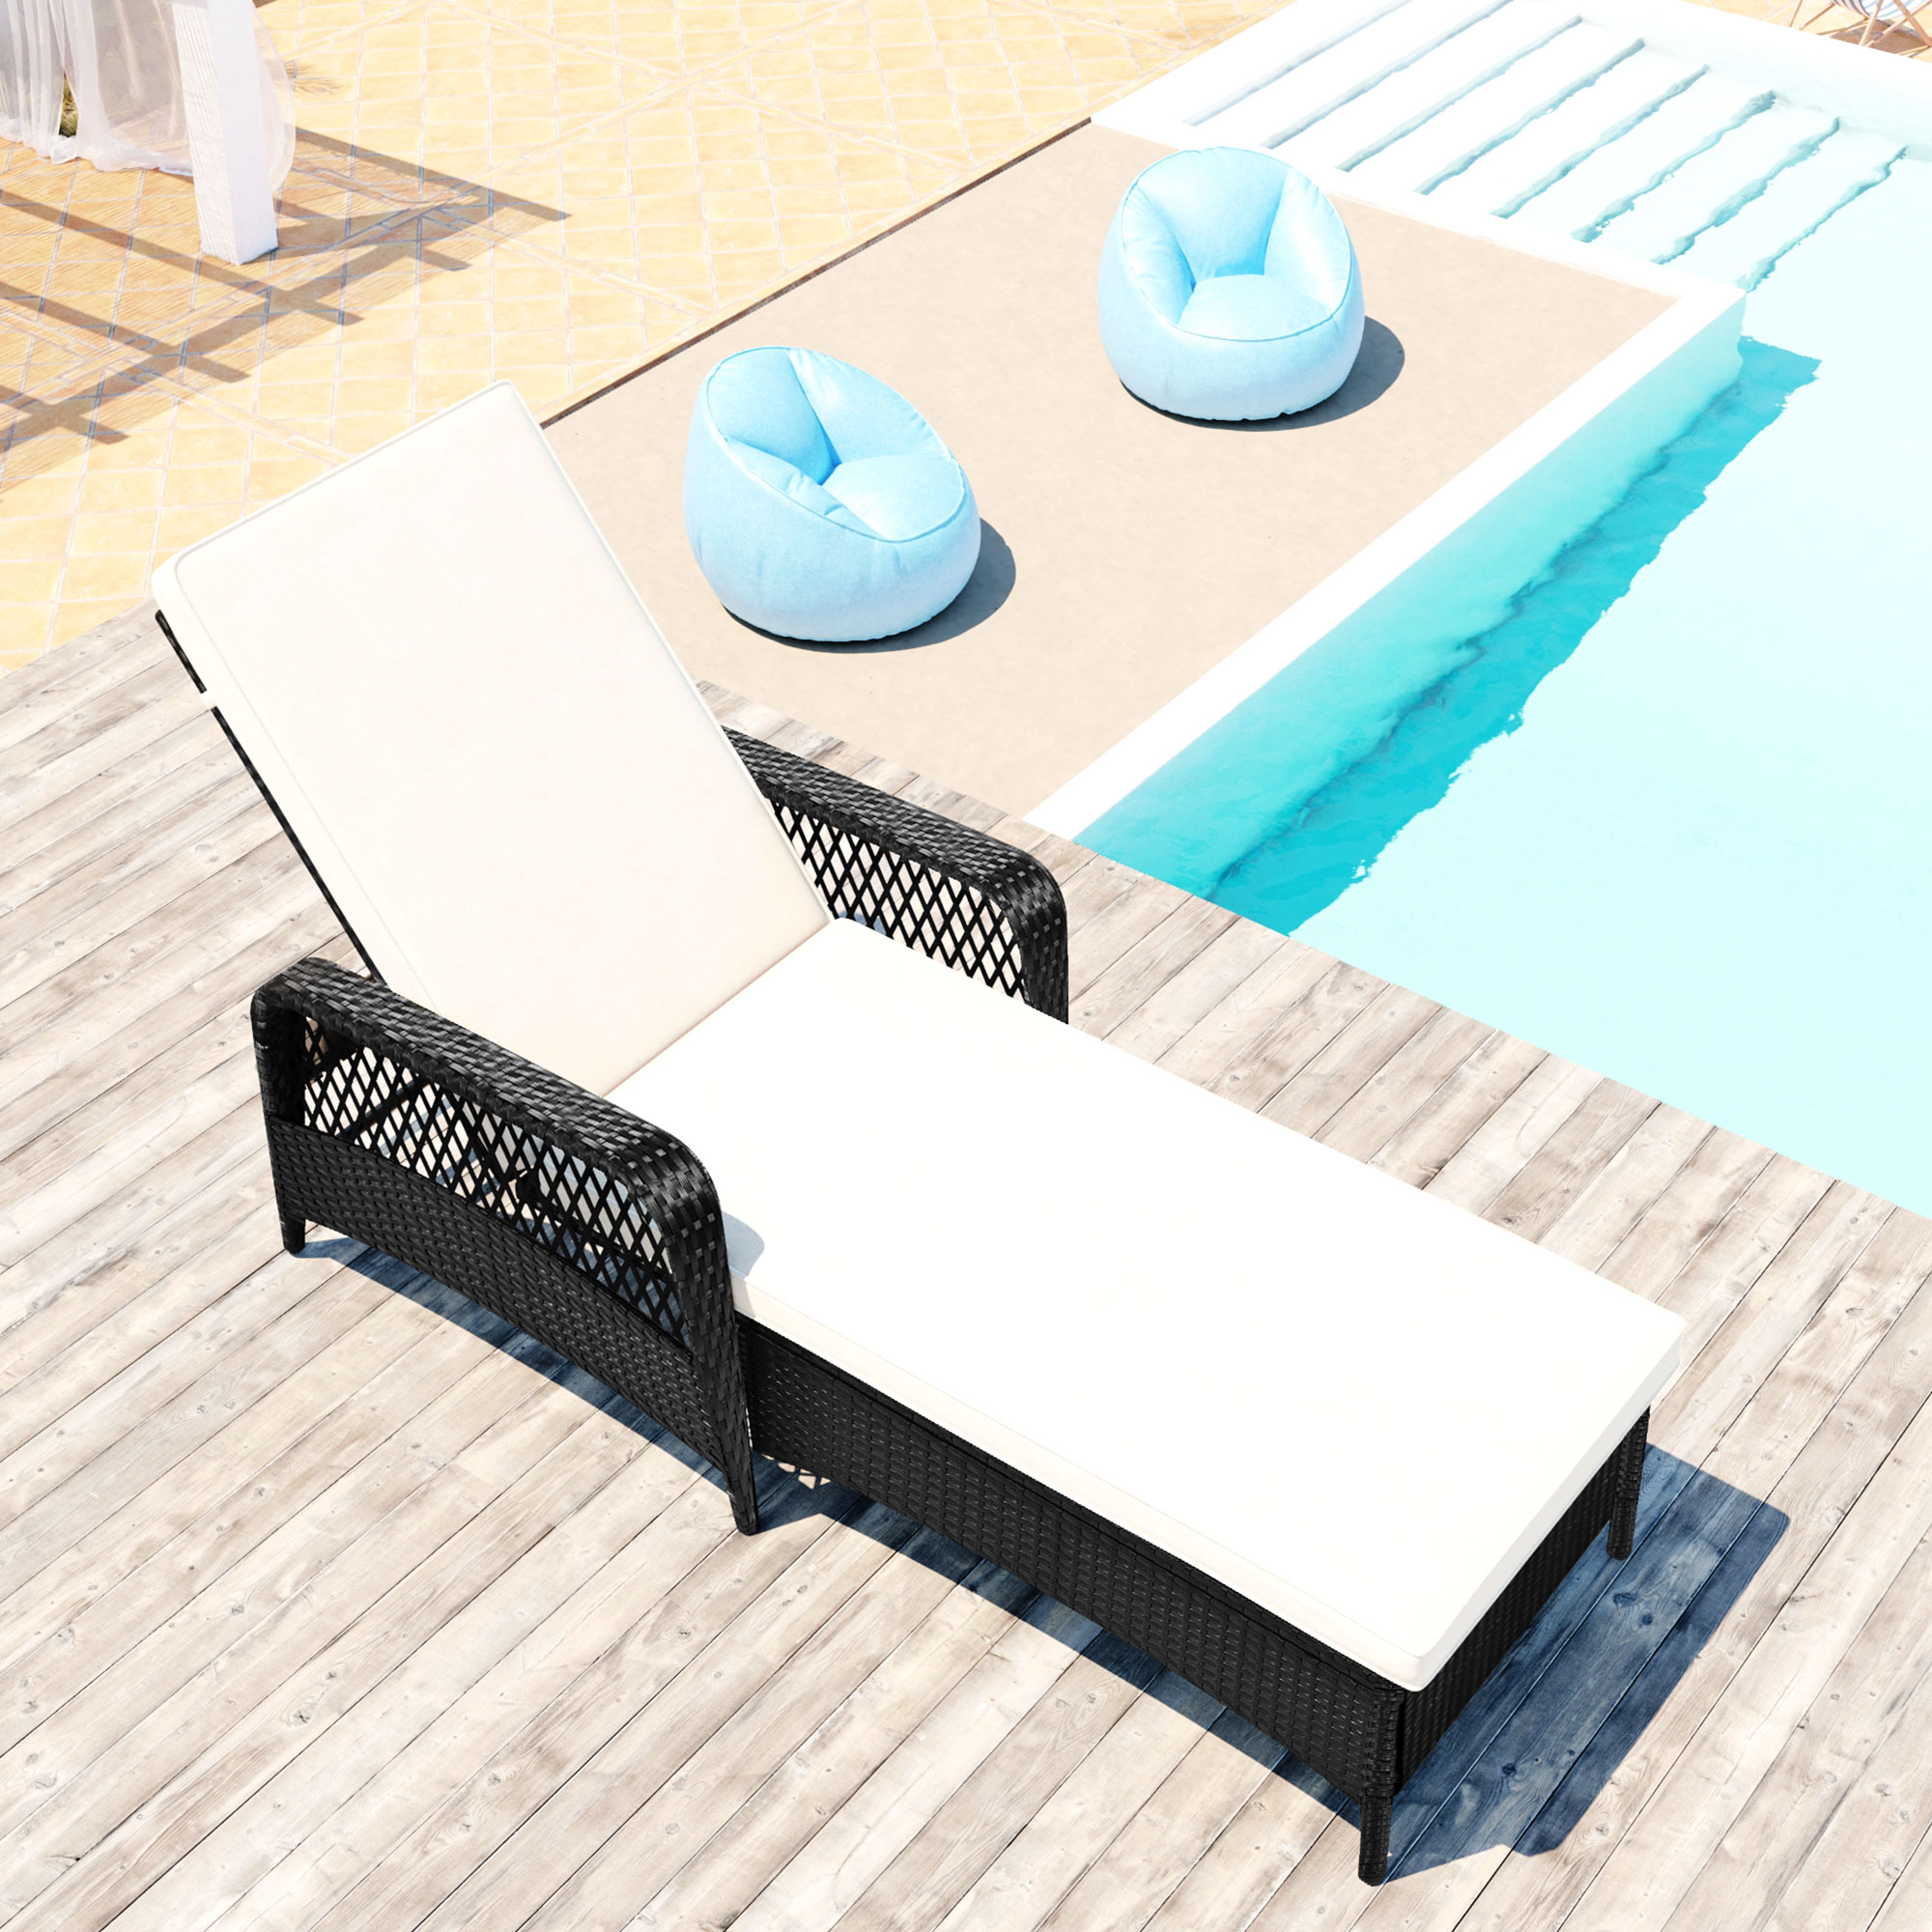 Patio Chaise Lounge Chair, Rattan Wicker Chaise Lounge, All-Weather Sun Chaise Lounge Furniture, Pool Furniture Sunbed with Removable Cushion, Tanning Lounge Chair with 6 Adjustable Positions, B332 - image 3 of 9